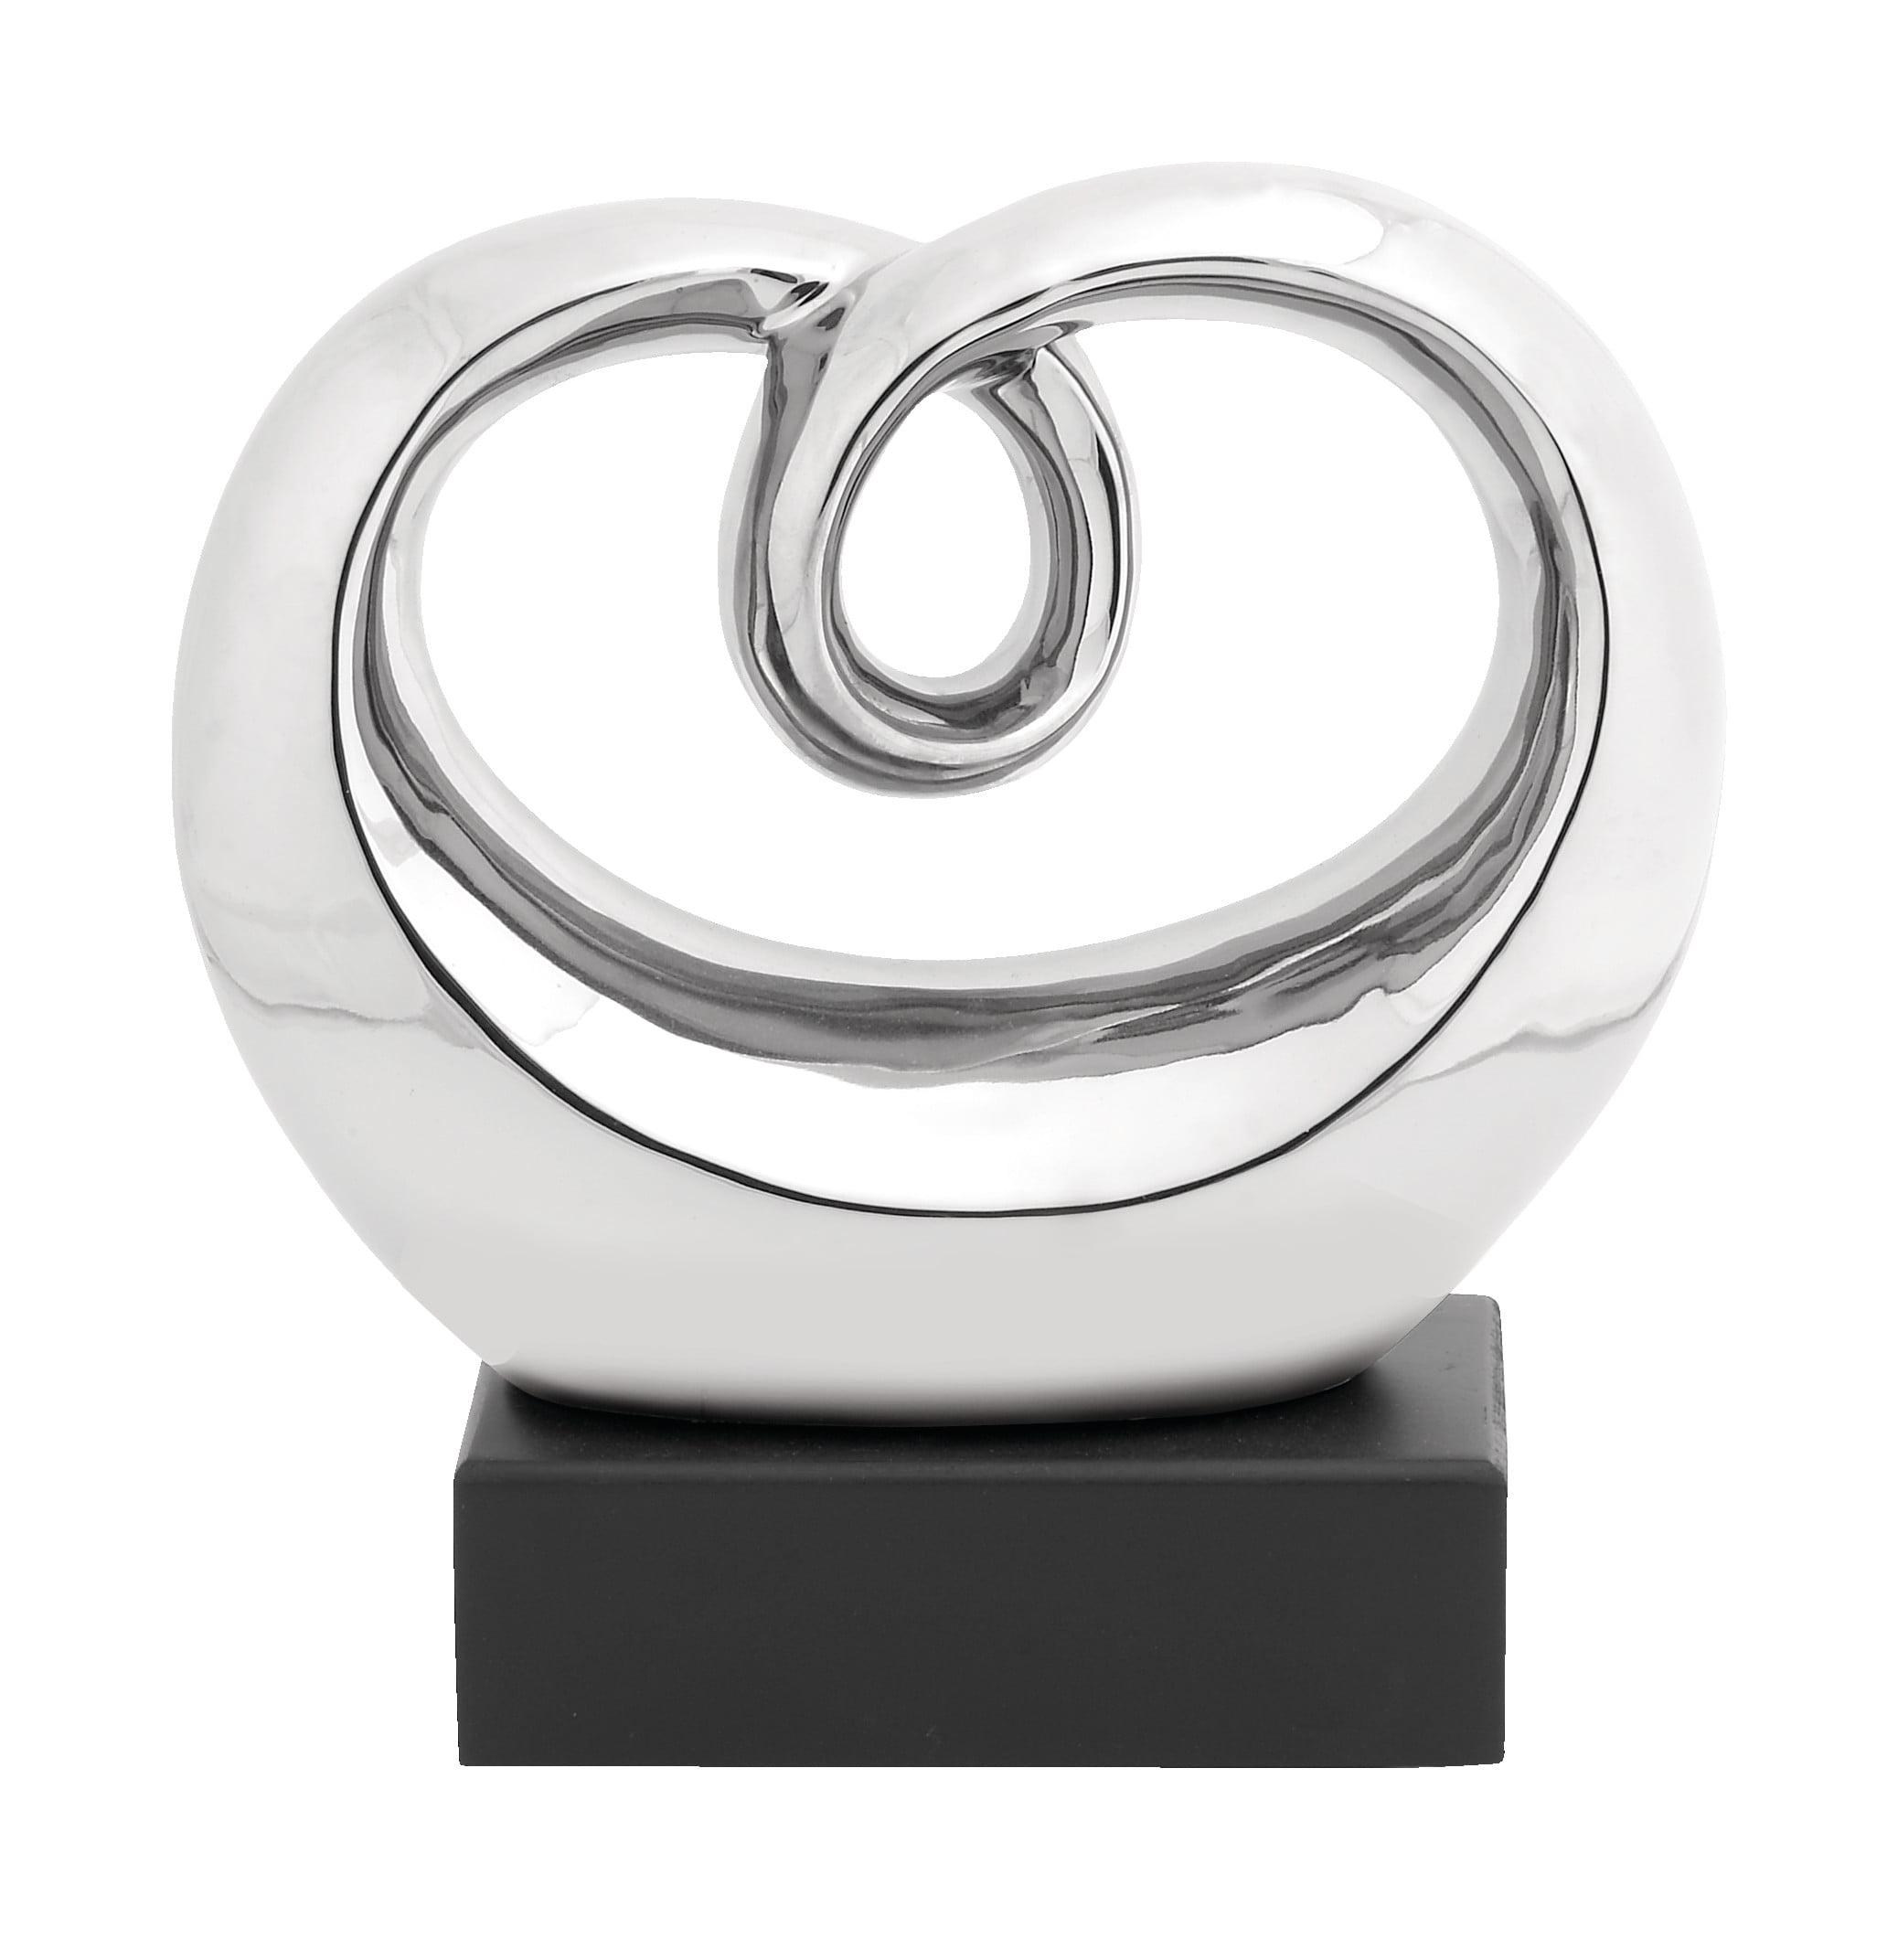 Elegant Silver Swirl 13" Ceramic Abstract Statue with Black Base